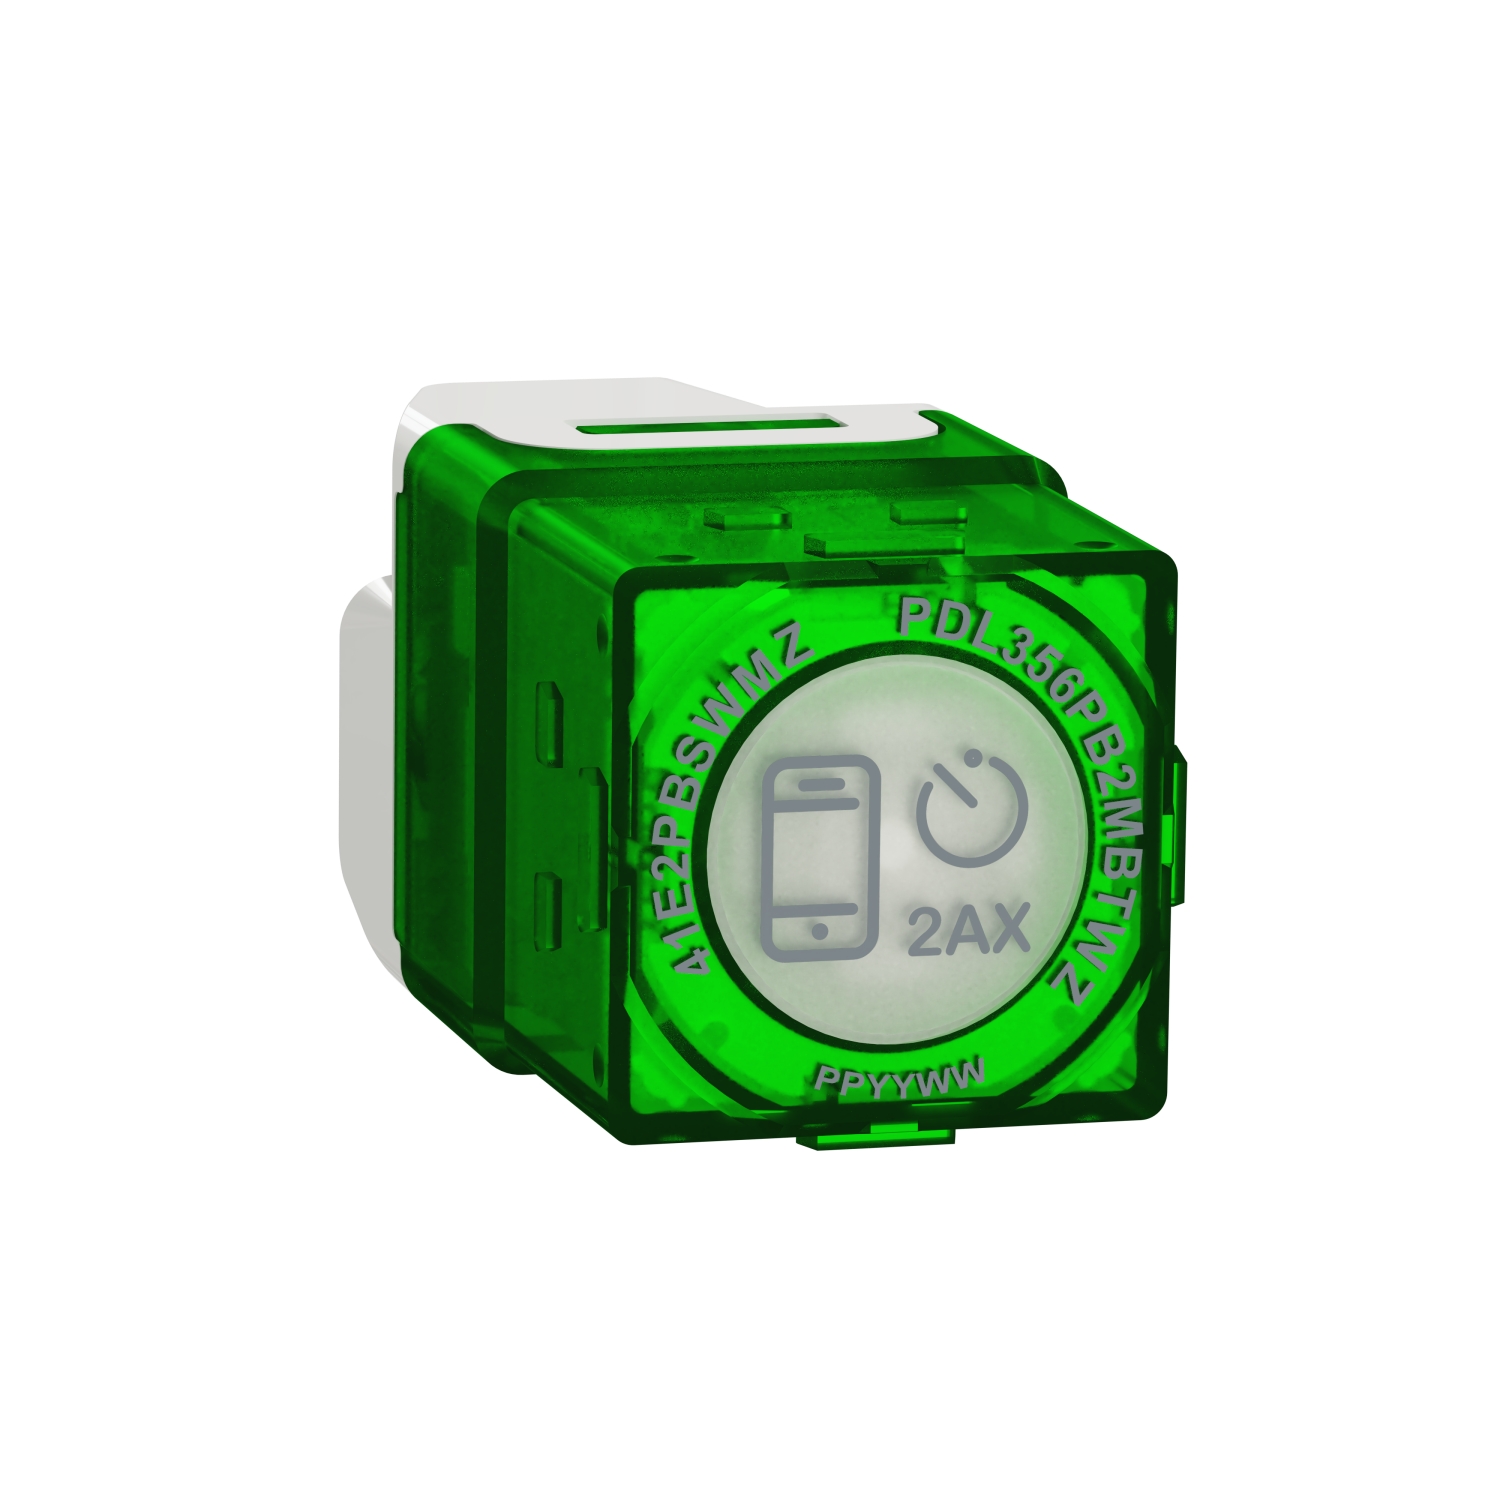 PDL Wiser Iconic Push -Button Switch Module 2AX with Zigbee